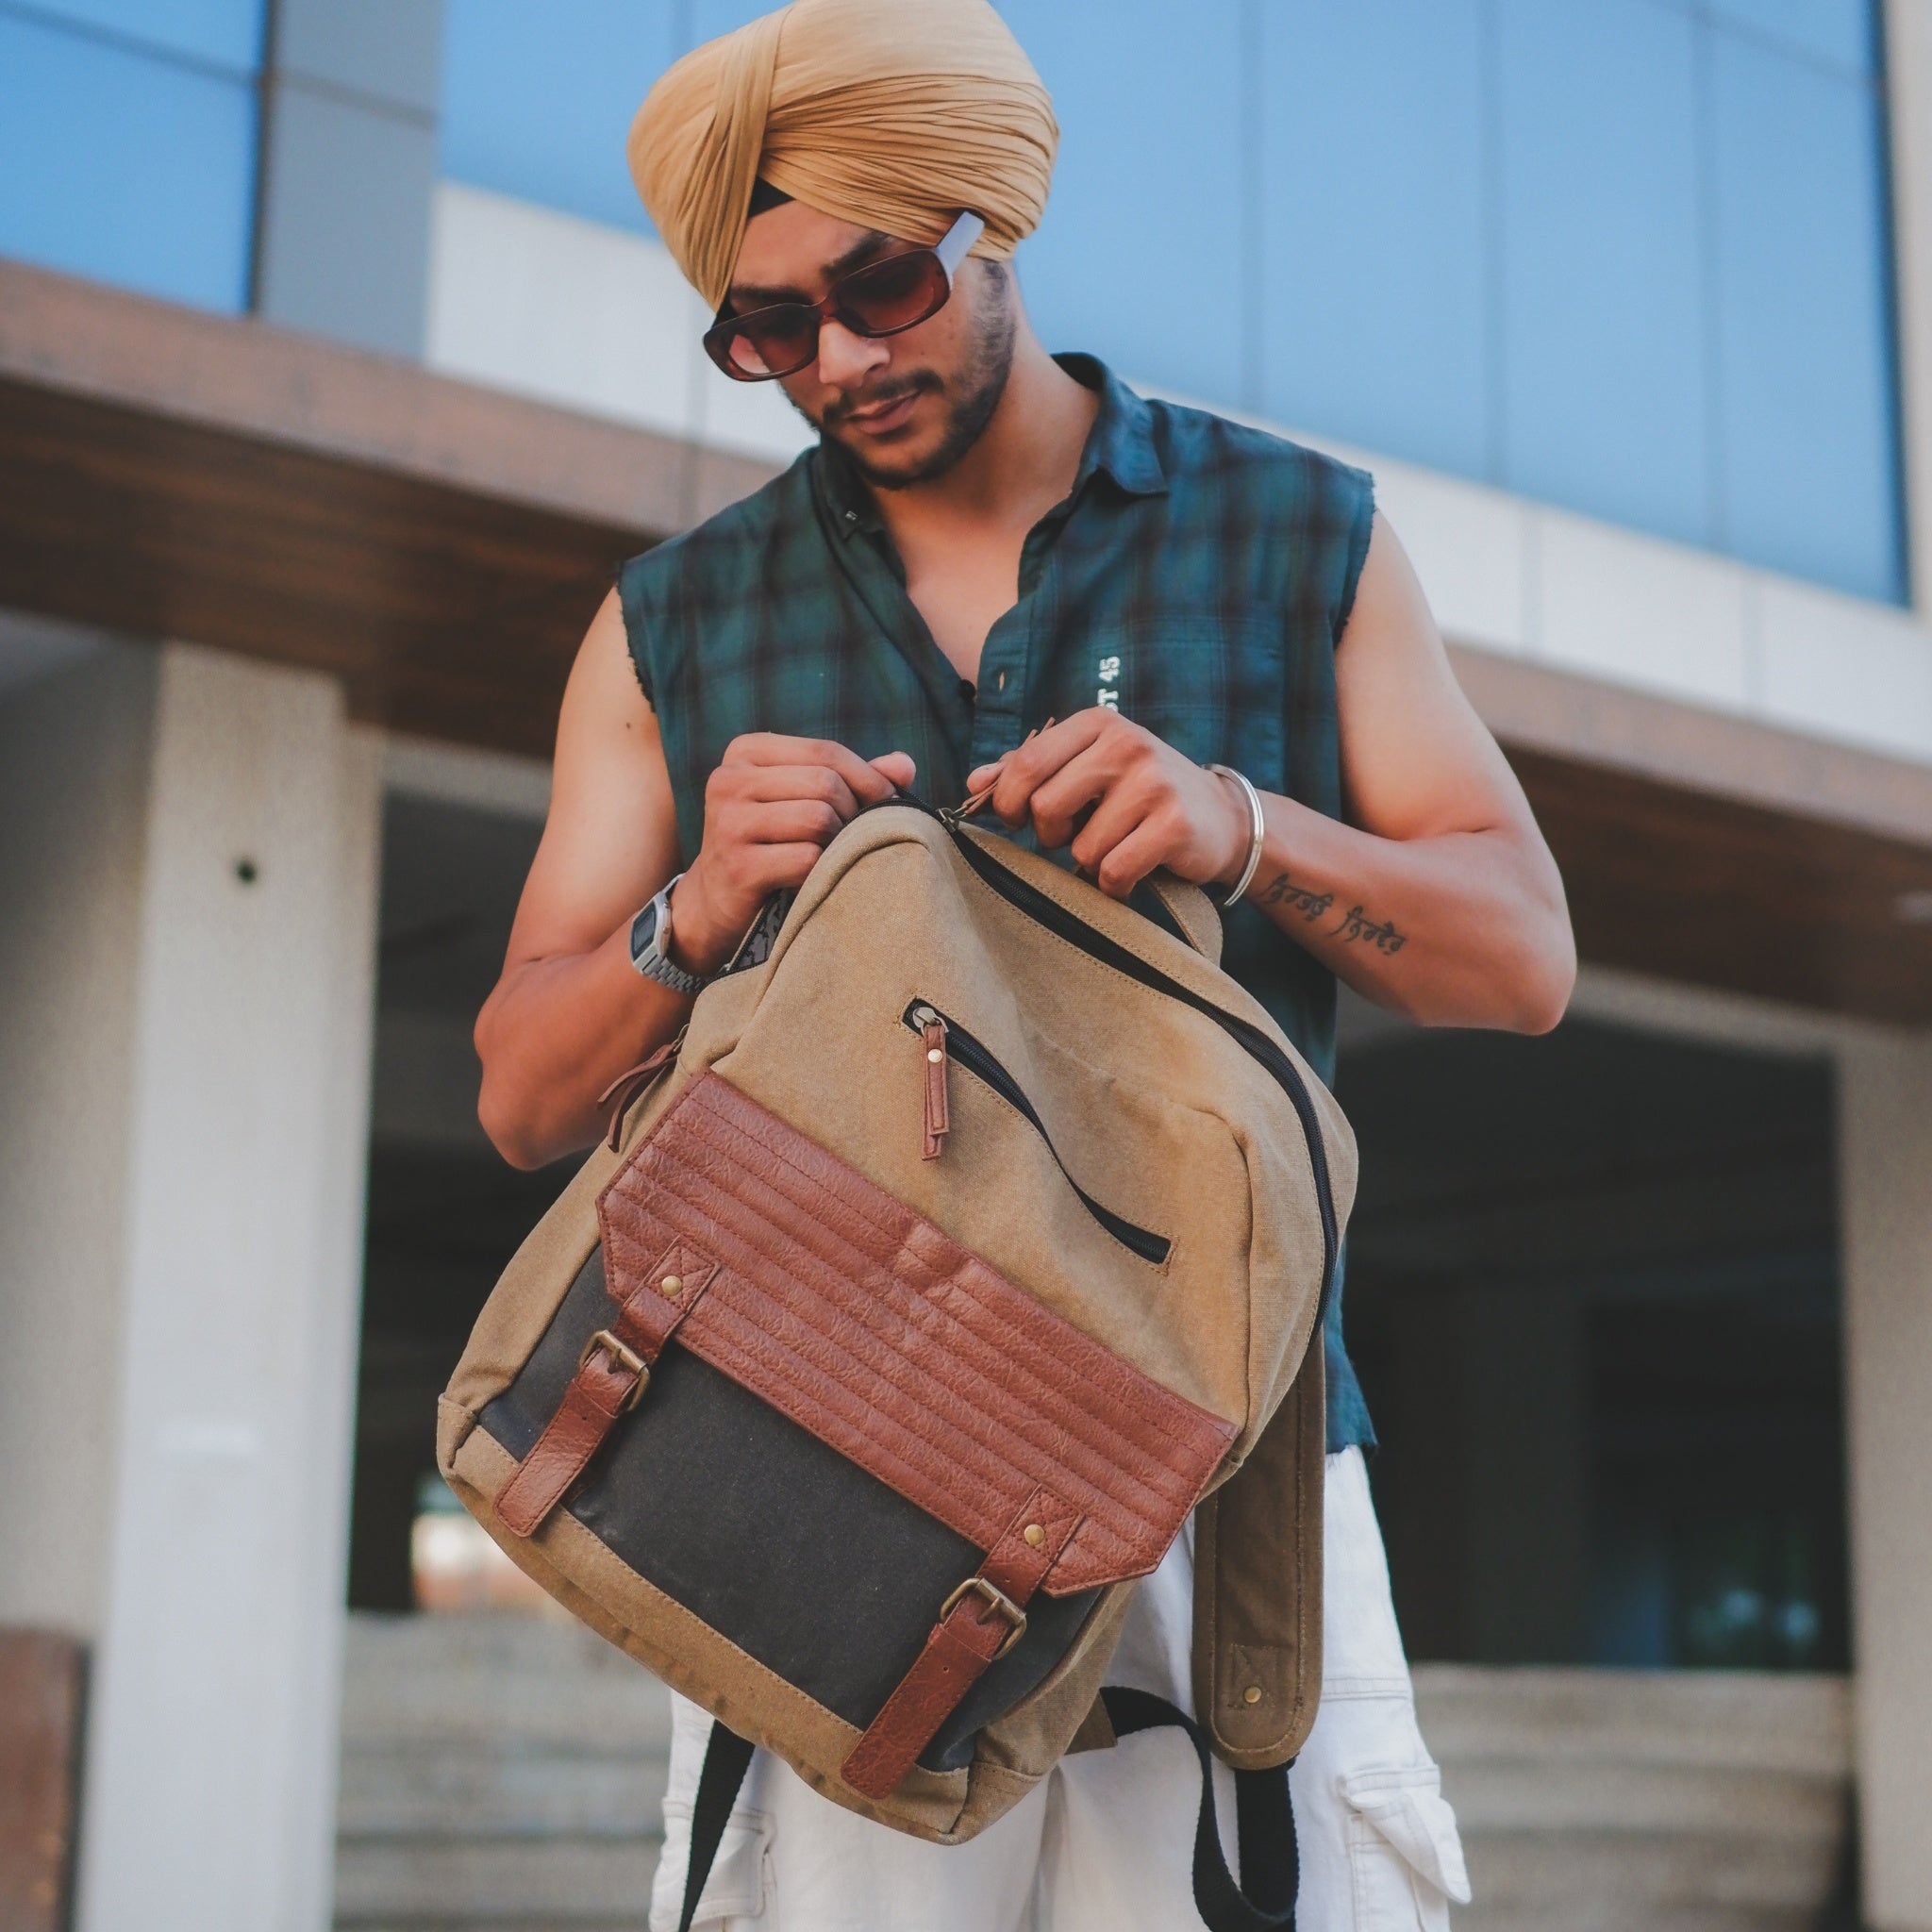 Mona B Upcycled Canvas Backpack for Office | School and College with Upto 14 Laptop/ Mac Book/ Tablet with Stylish Design for Men and Women: Brad